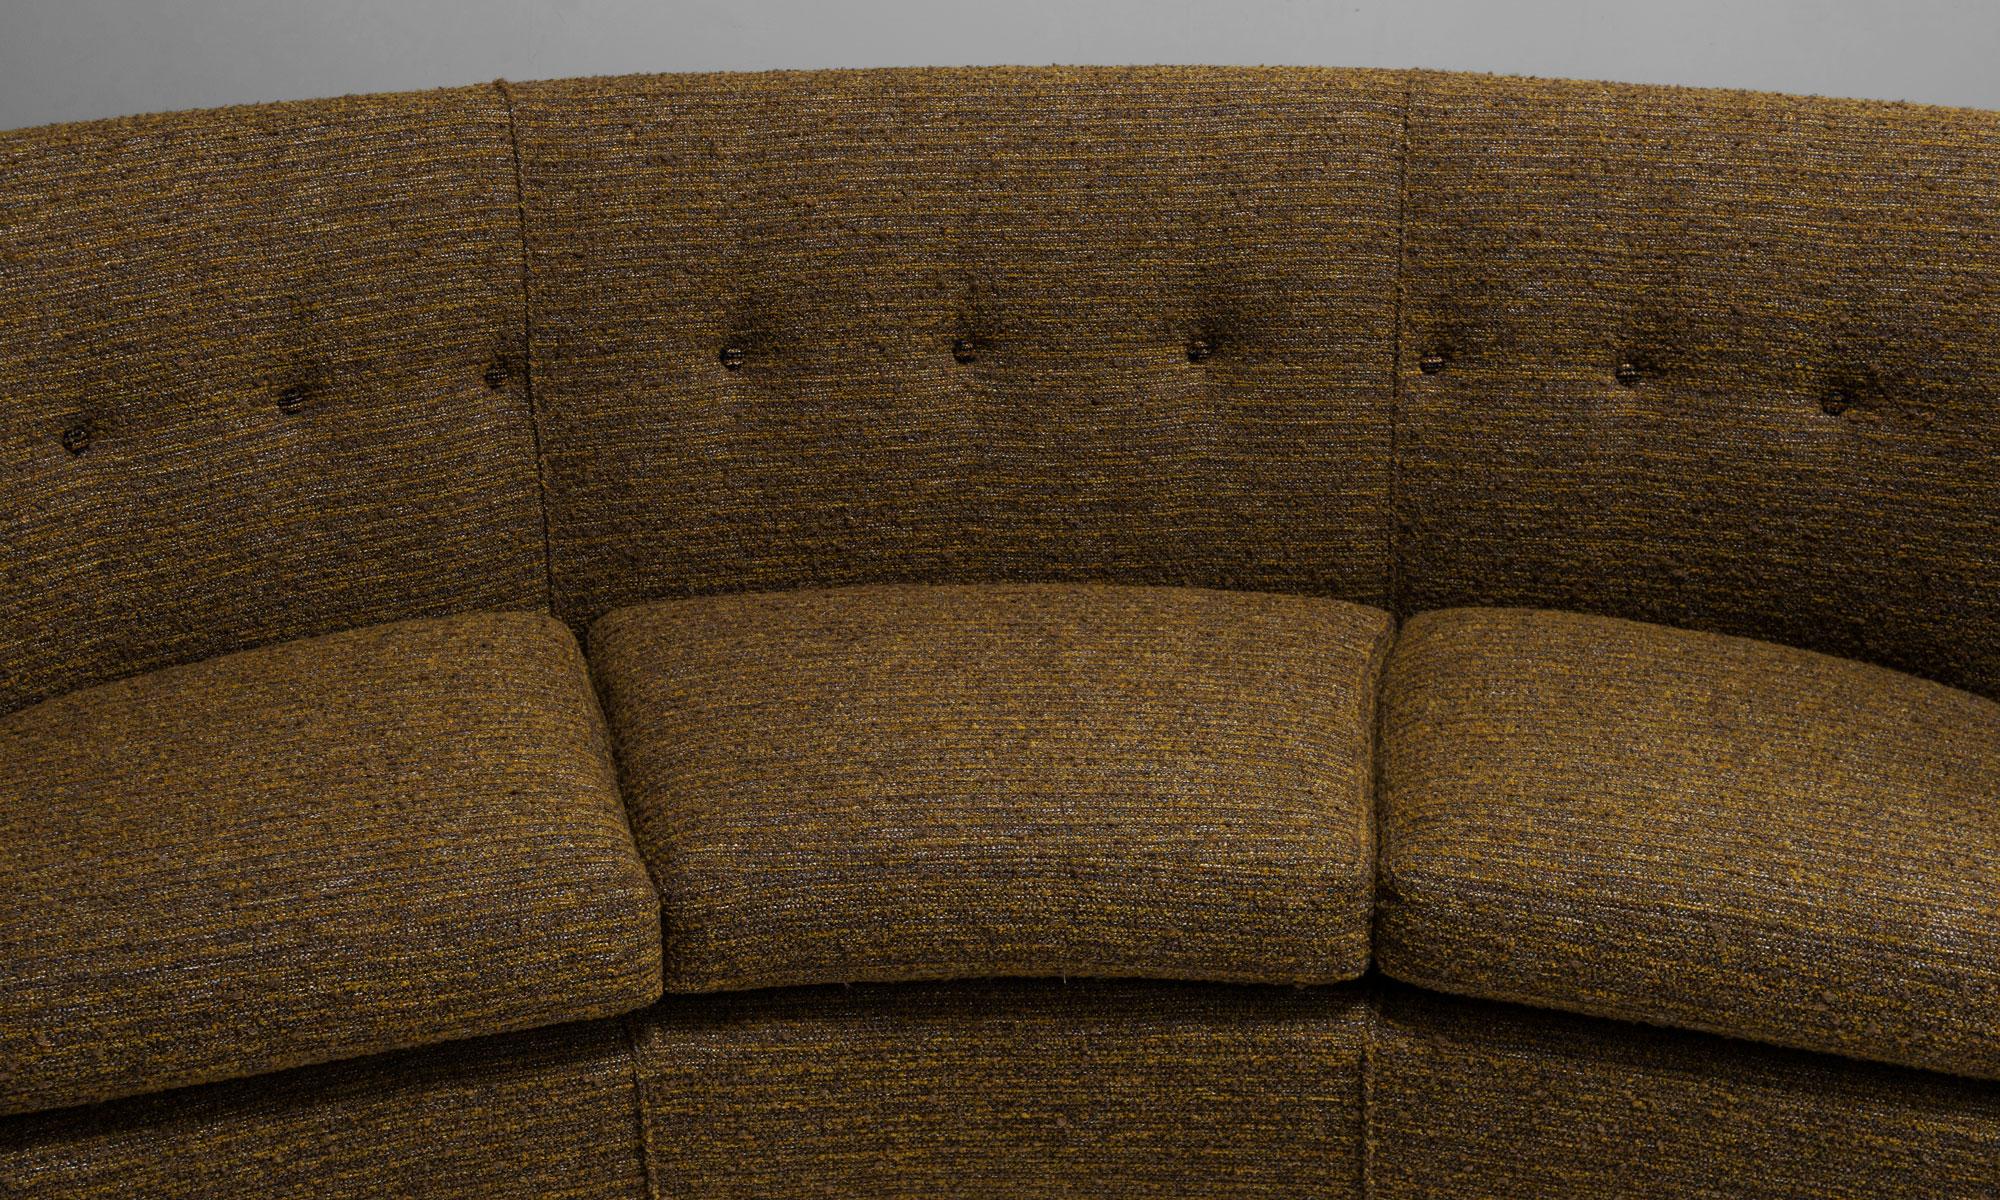 English Curved Sofa in Wool Blend from Pierre Frey